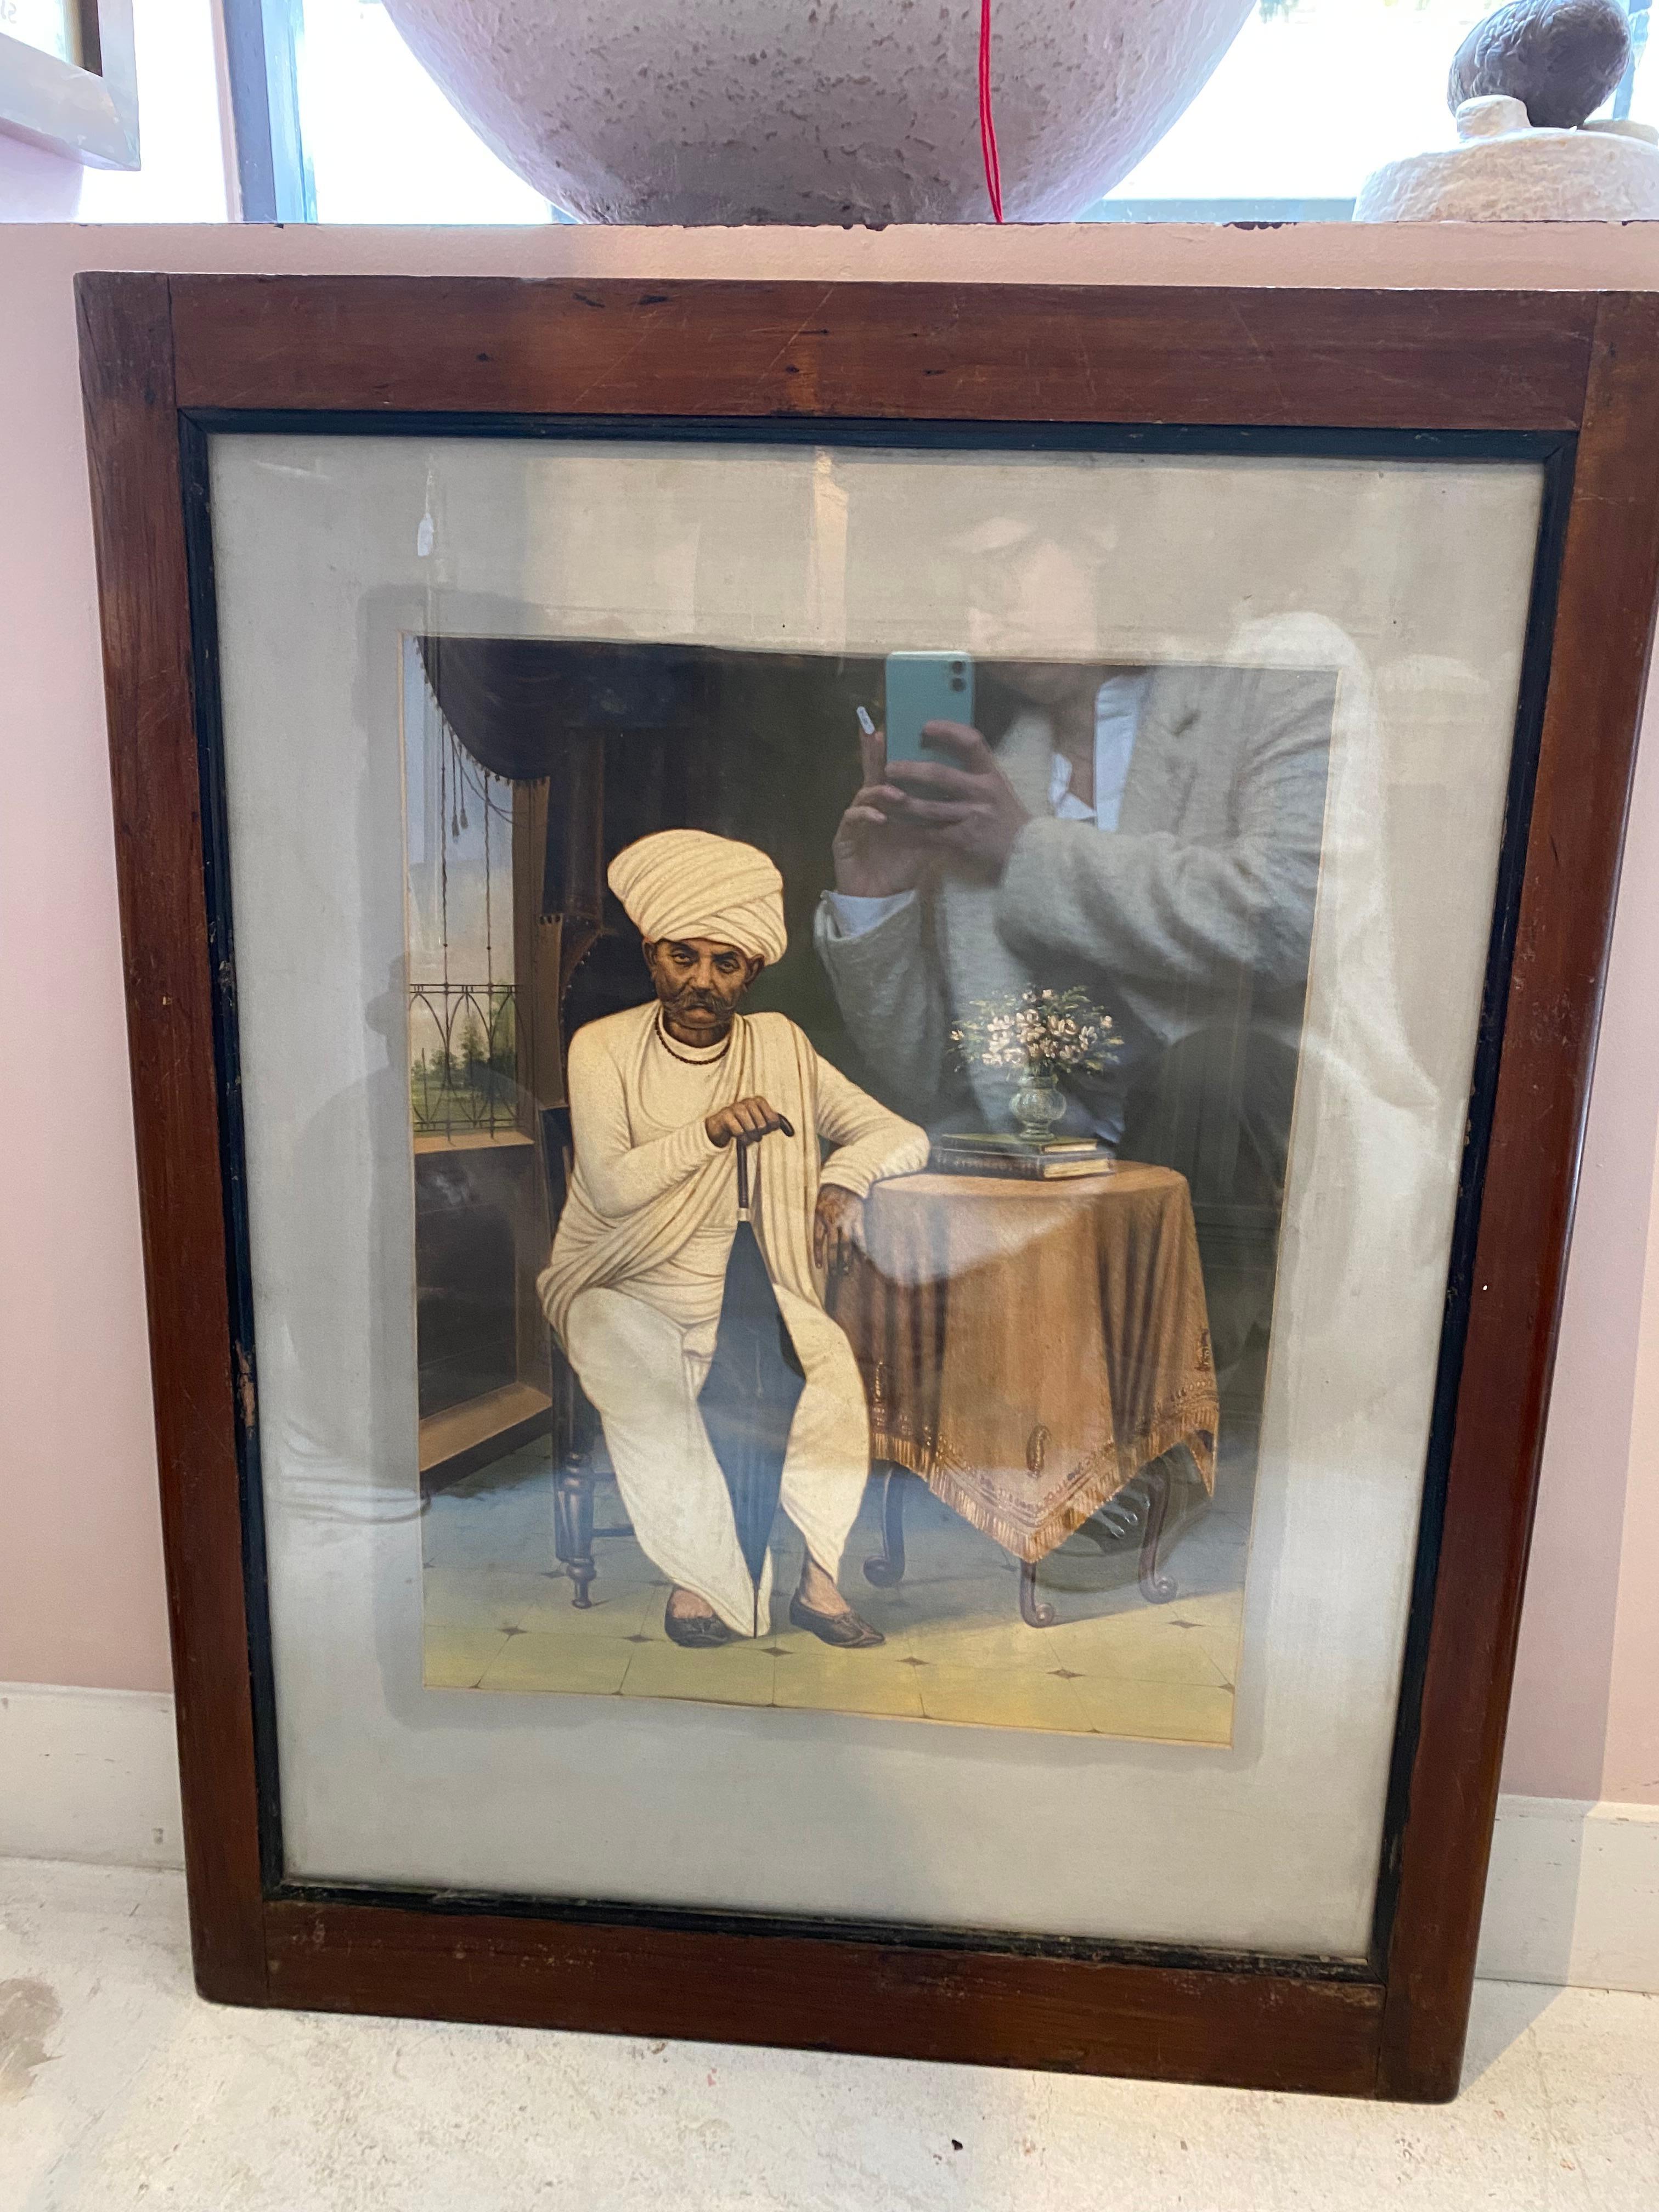 This painting features an Indian Man seated in his  interior. His Traditional outfit show he was an important person.
Painted on paper
Original teak wood teak
Comes from Rajasthan
